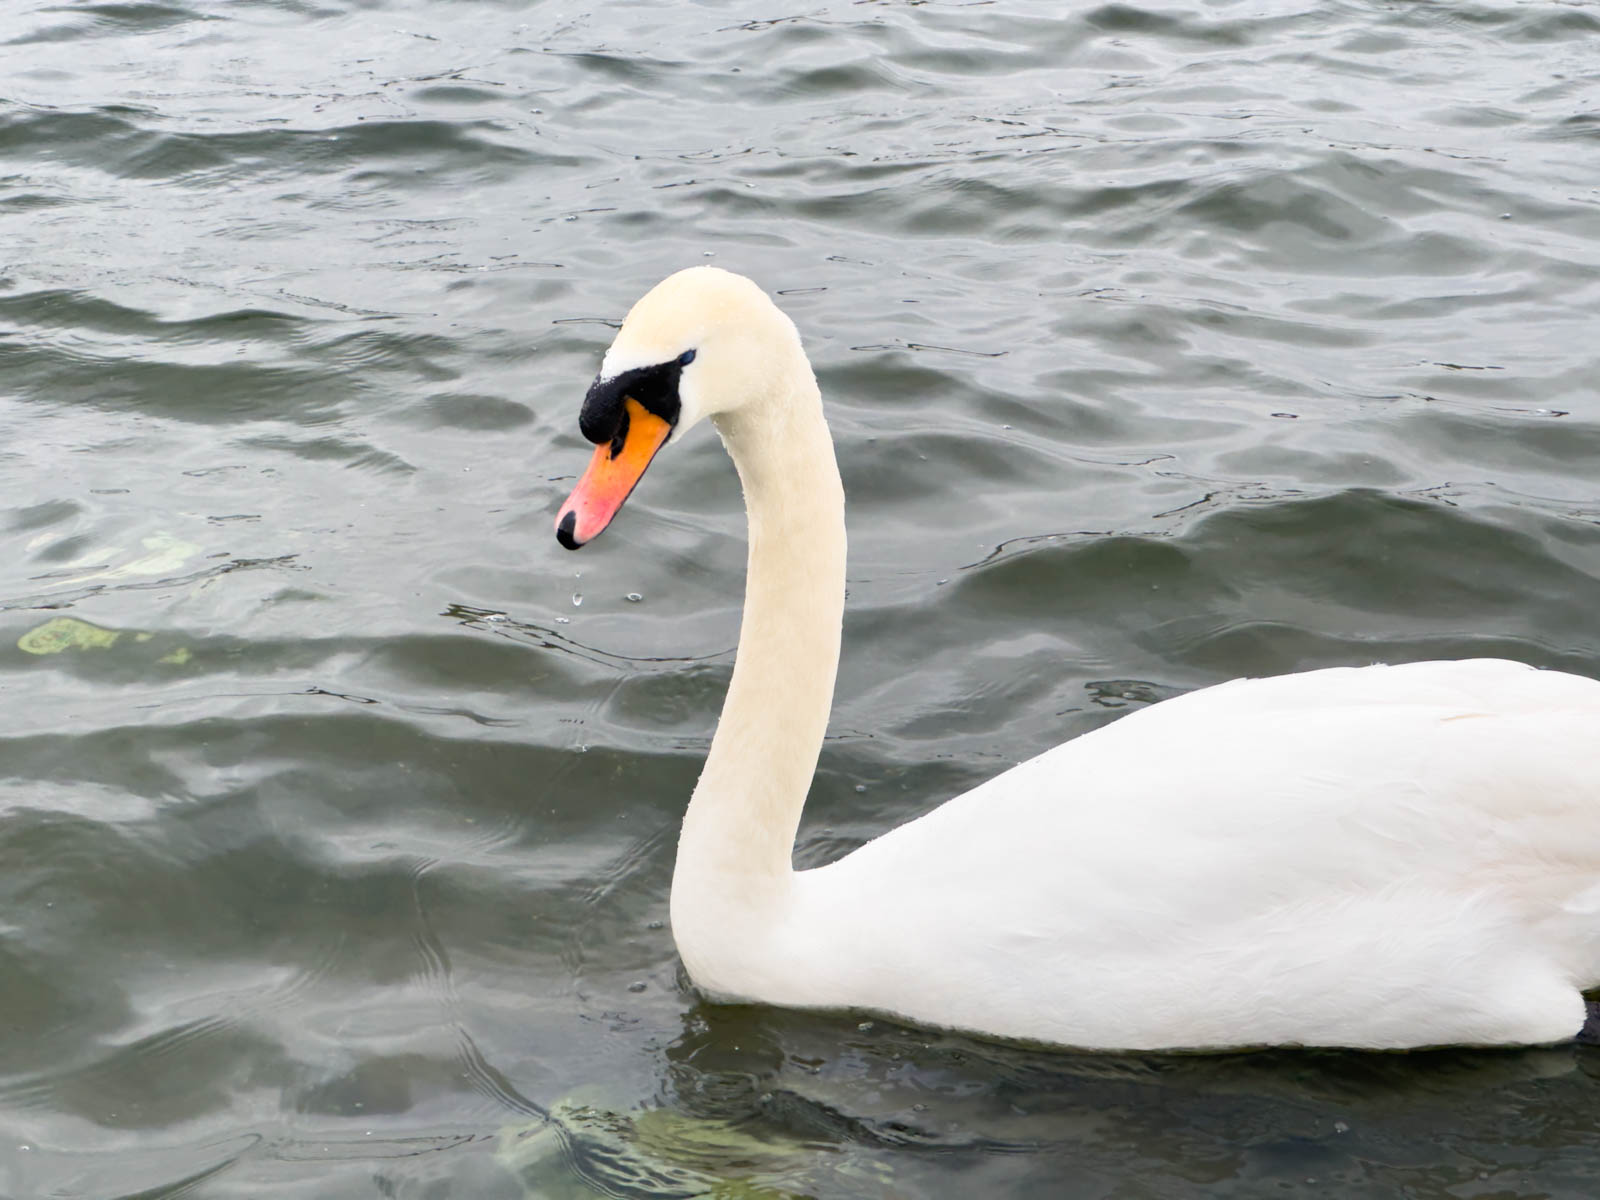 A white swan is swimming in the water.